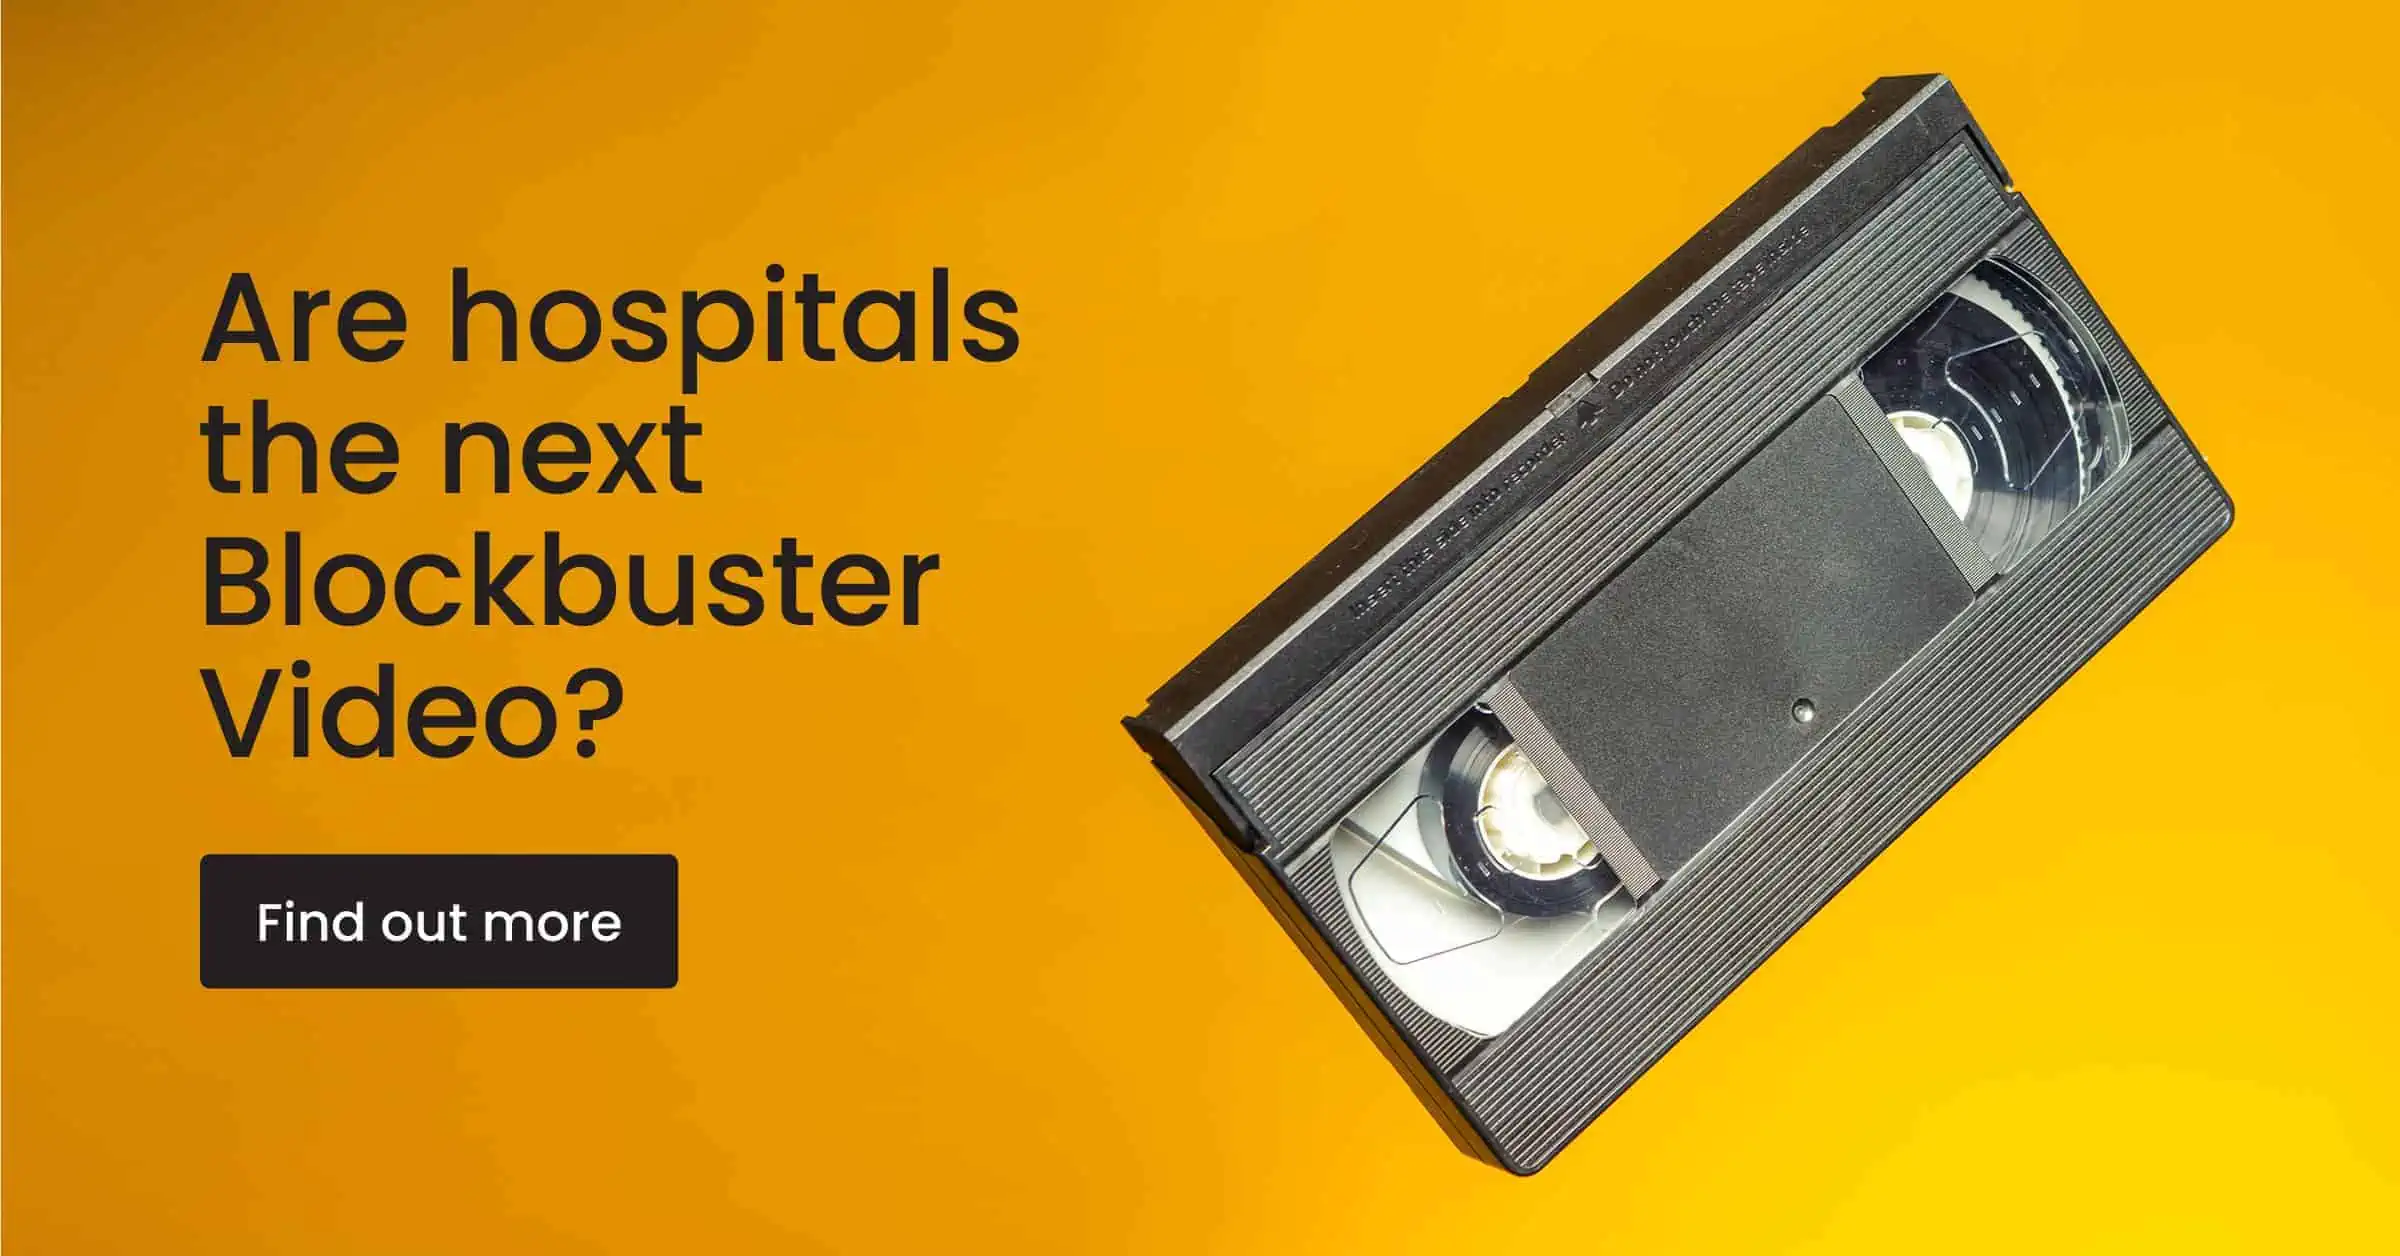 Are hospitals the next Blockbuster Video graphic